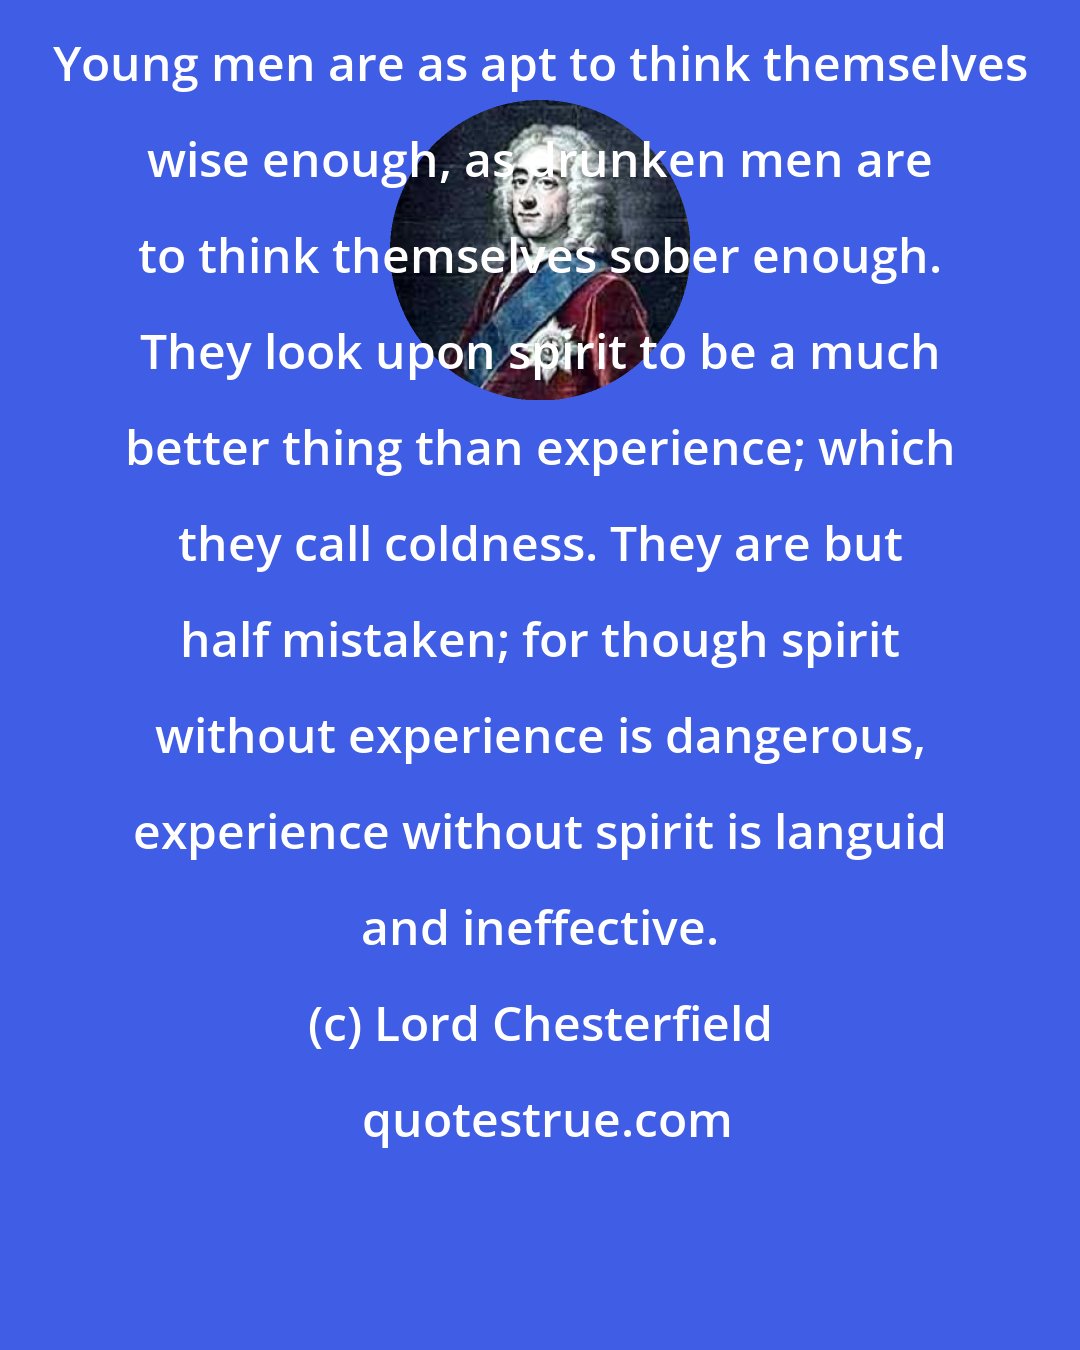 Lord Chesterfield: Young men are as apt to think themselves wise enough, as drunken men are to think themselves sober enough. They look upon spirit to be a much better thing than experience; which they call coldness. They are but half mistaken; for though spirit without experience is dangerous, experience without spirit is languid and ineffective.